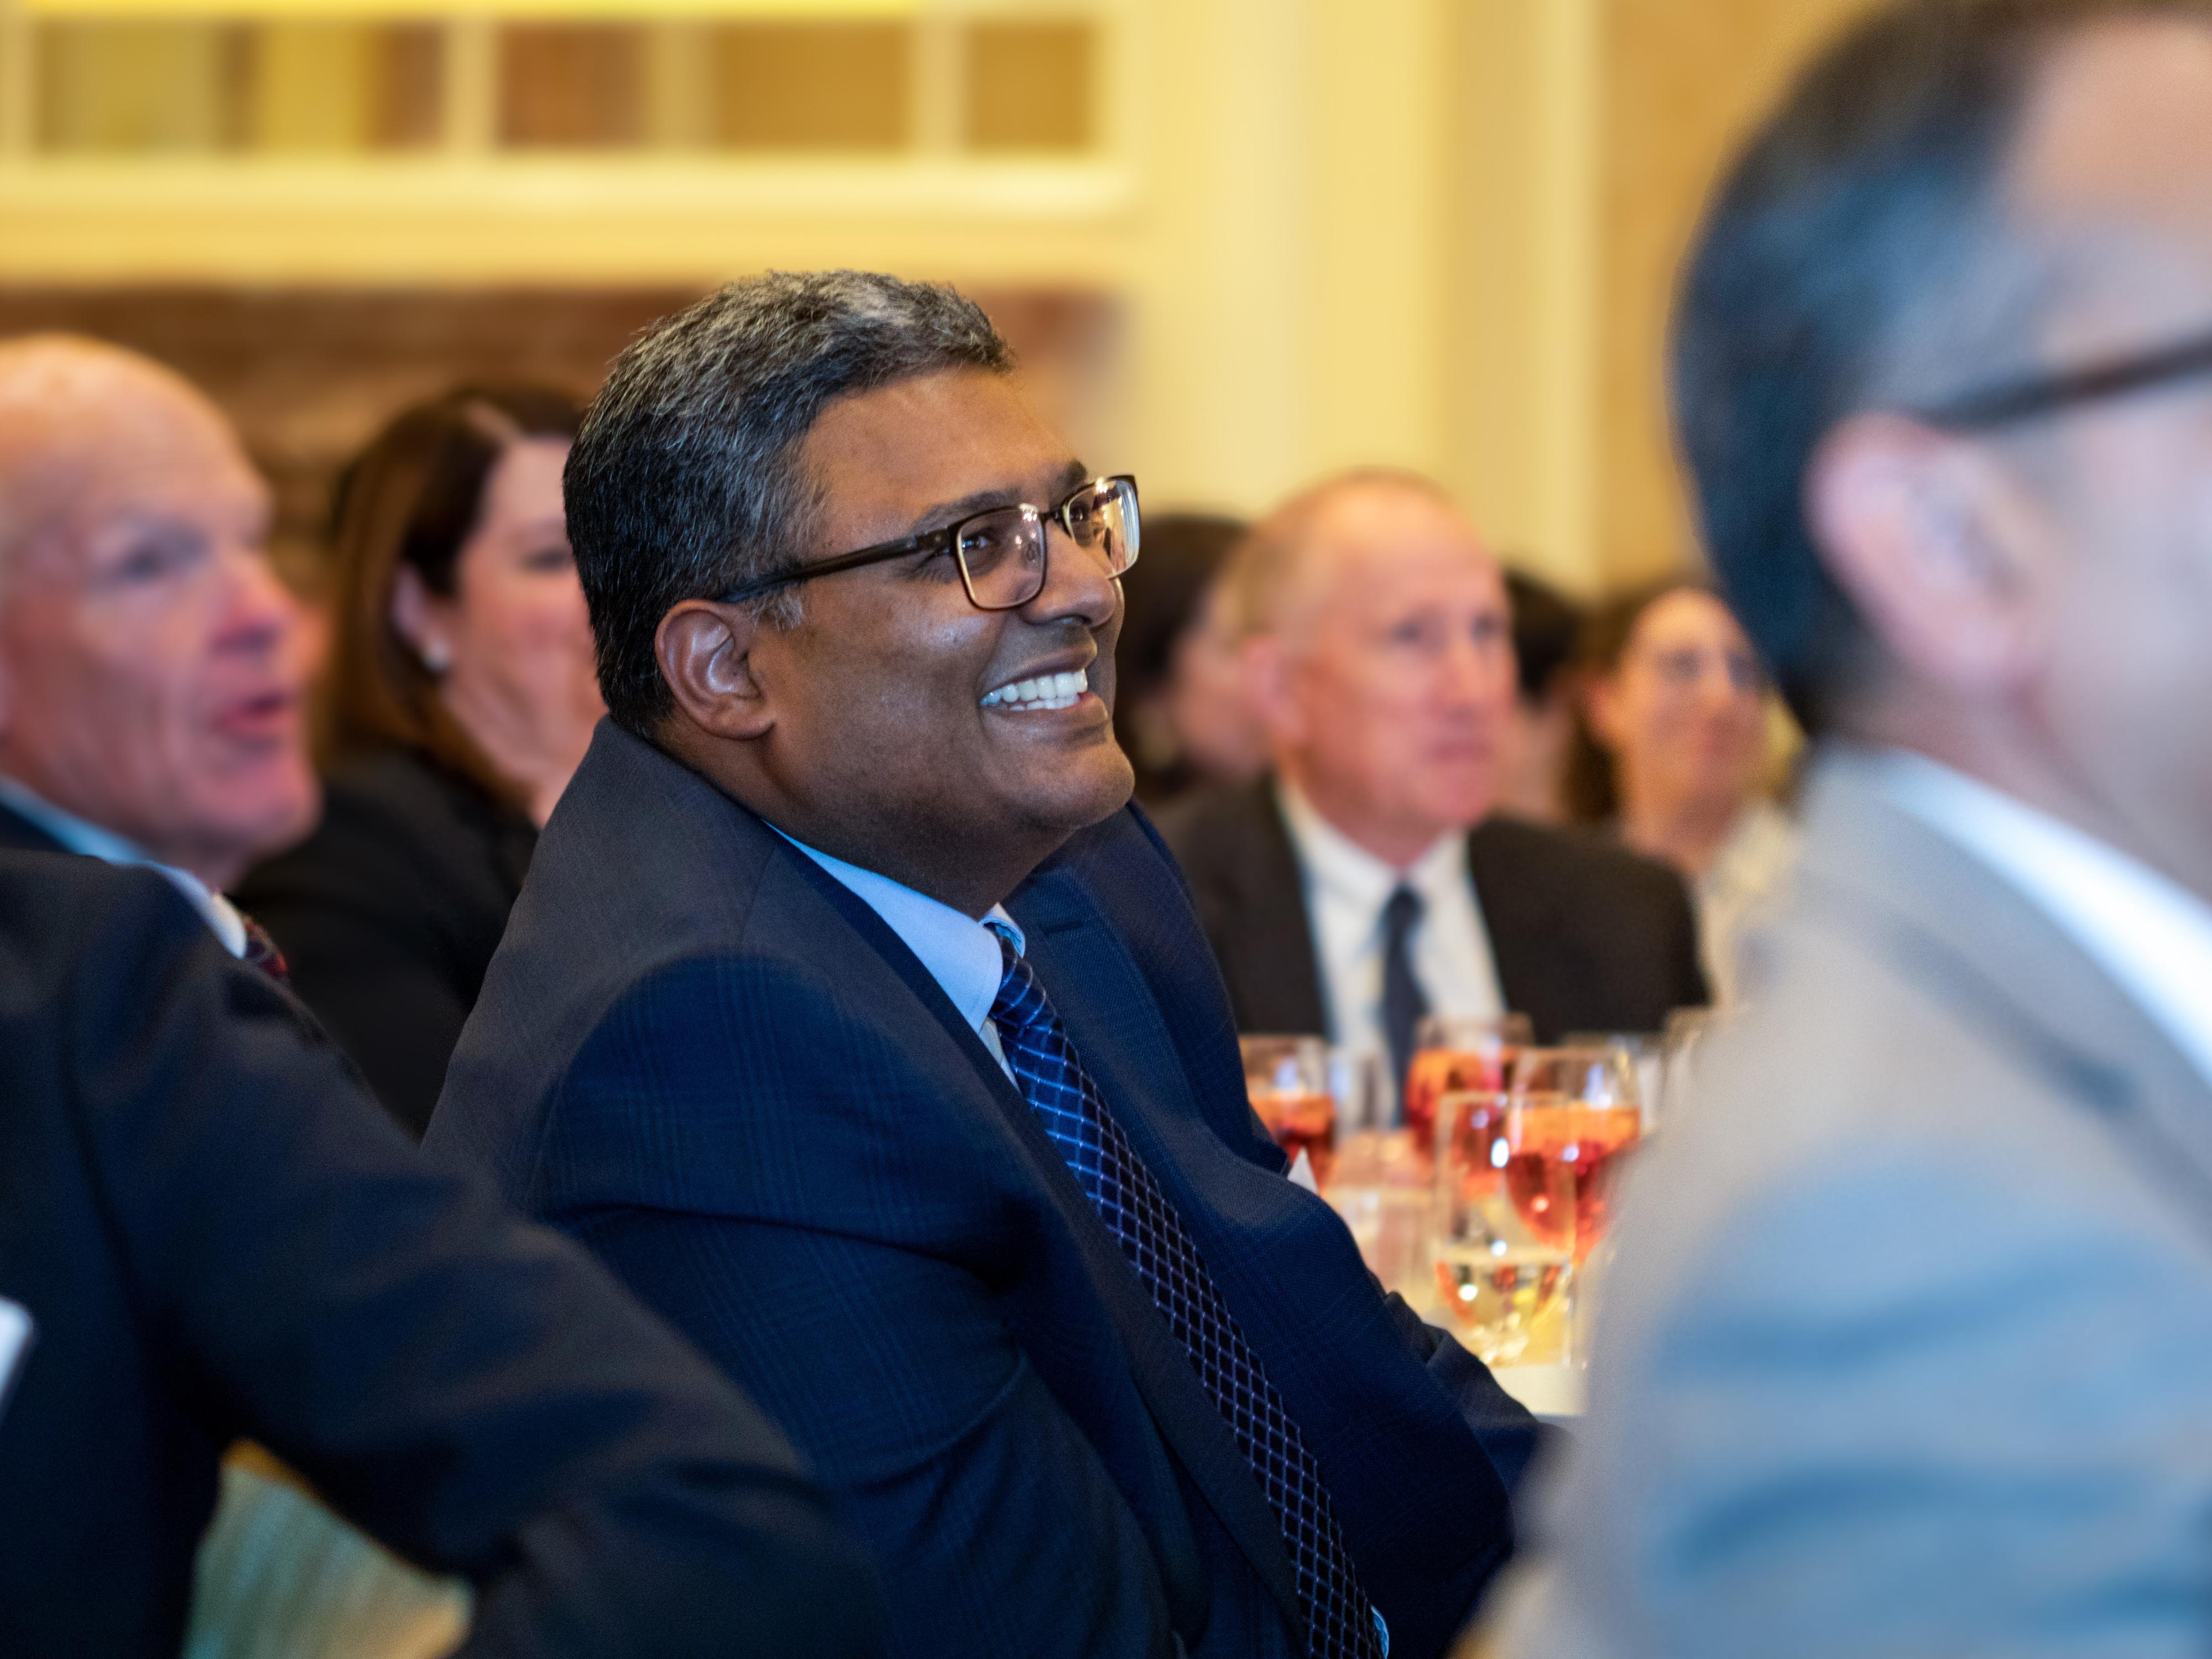 Thomas Varghese, MD, at an event